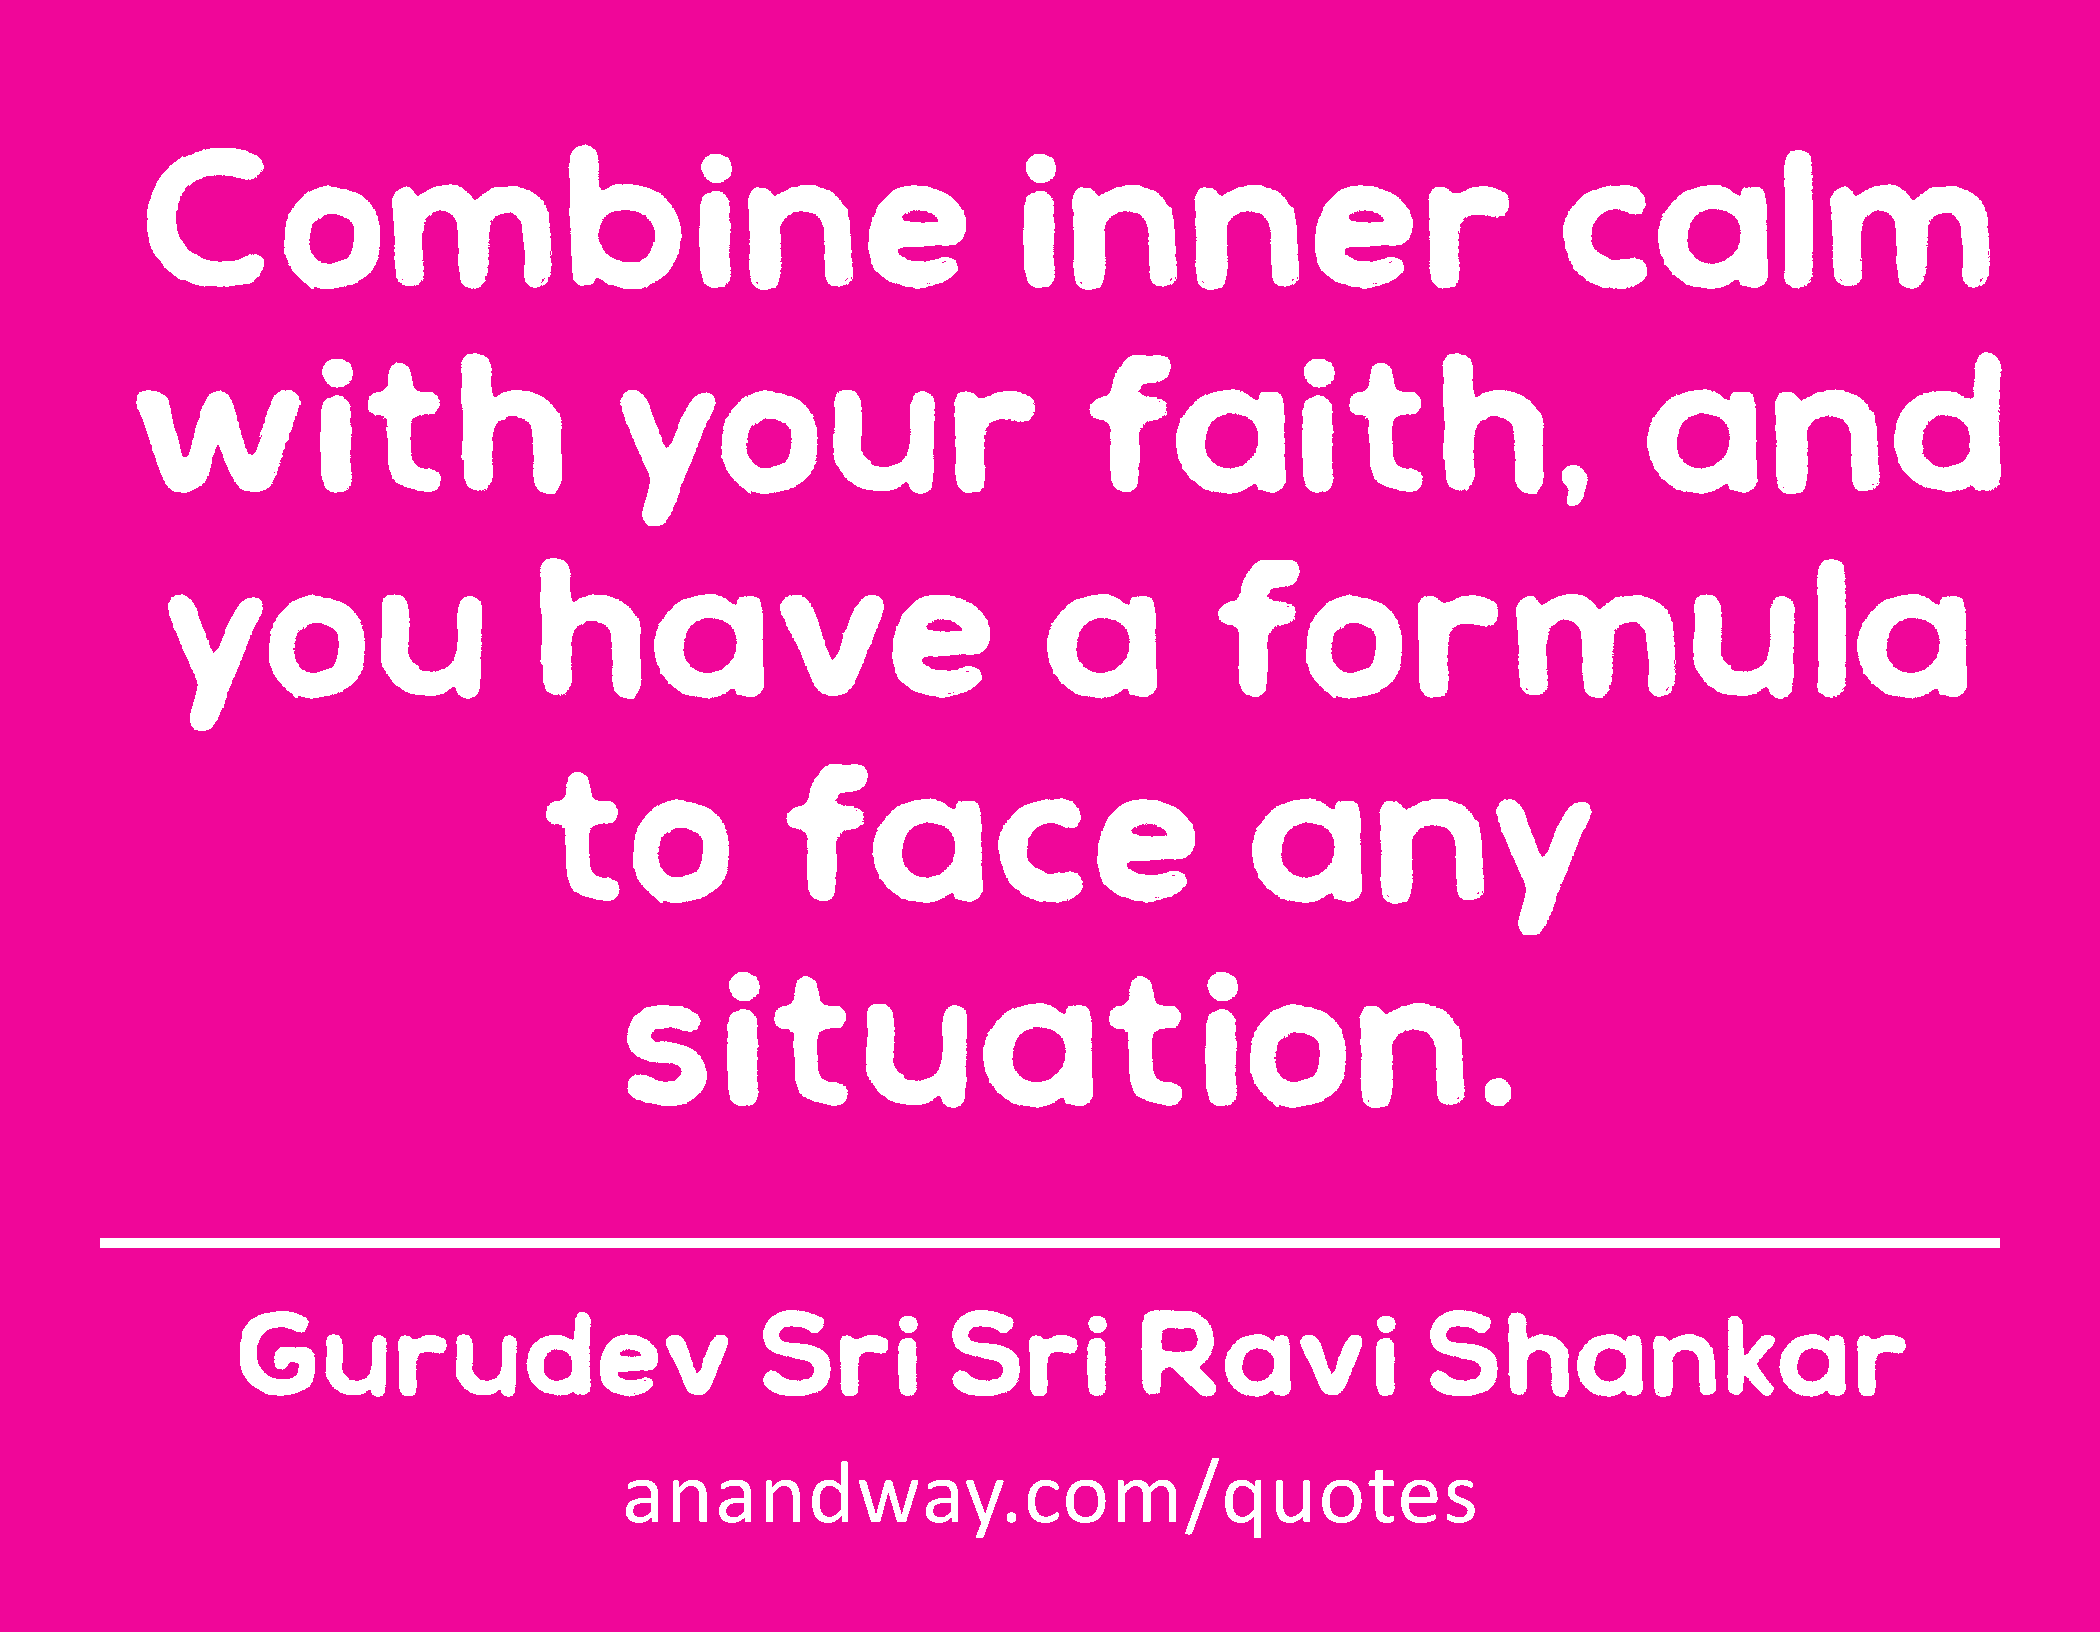 Combine inner calm with your faith, and you have a formula to face any situation. 
 -Gurudev Sri Sri Ravi Shankar